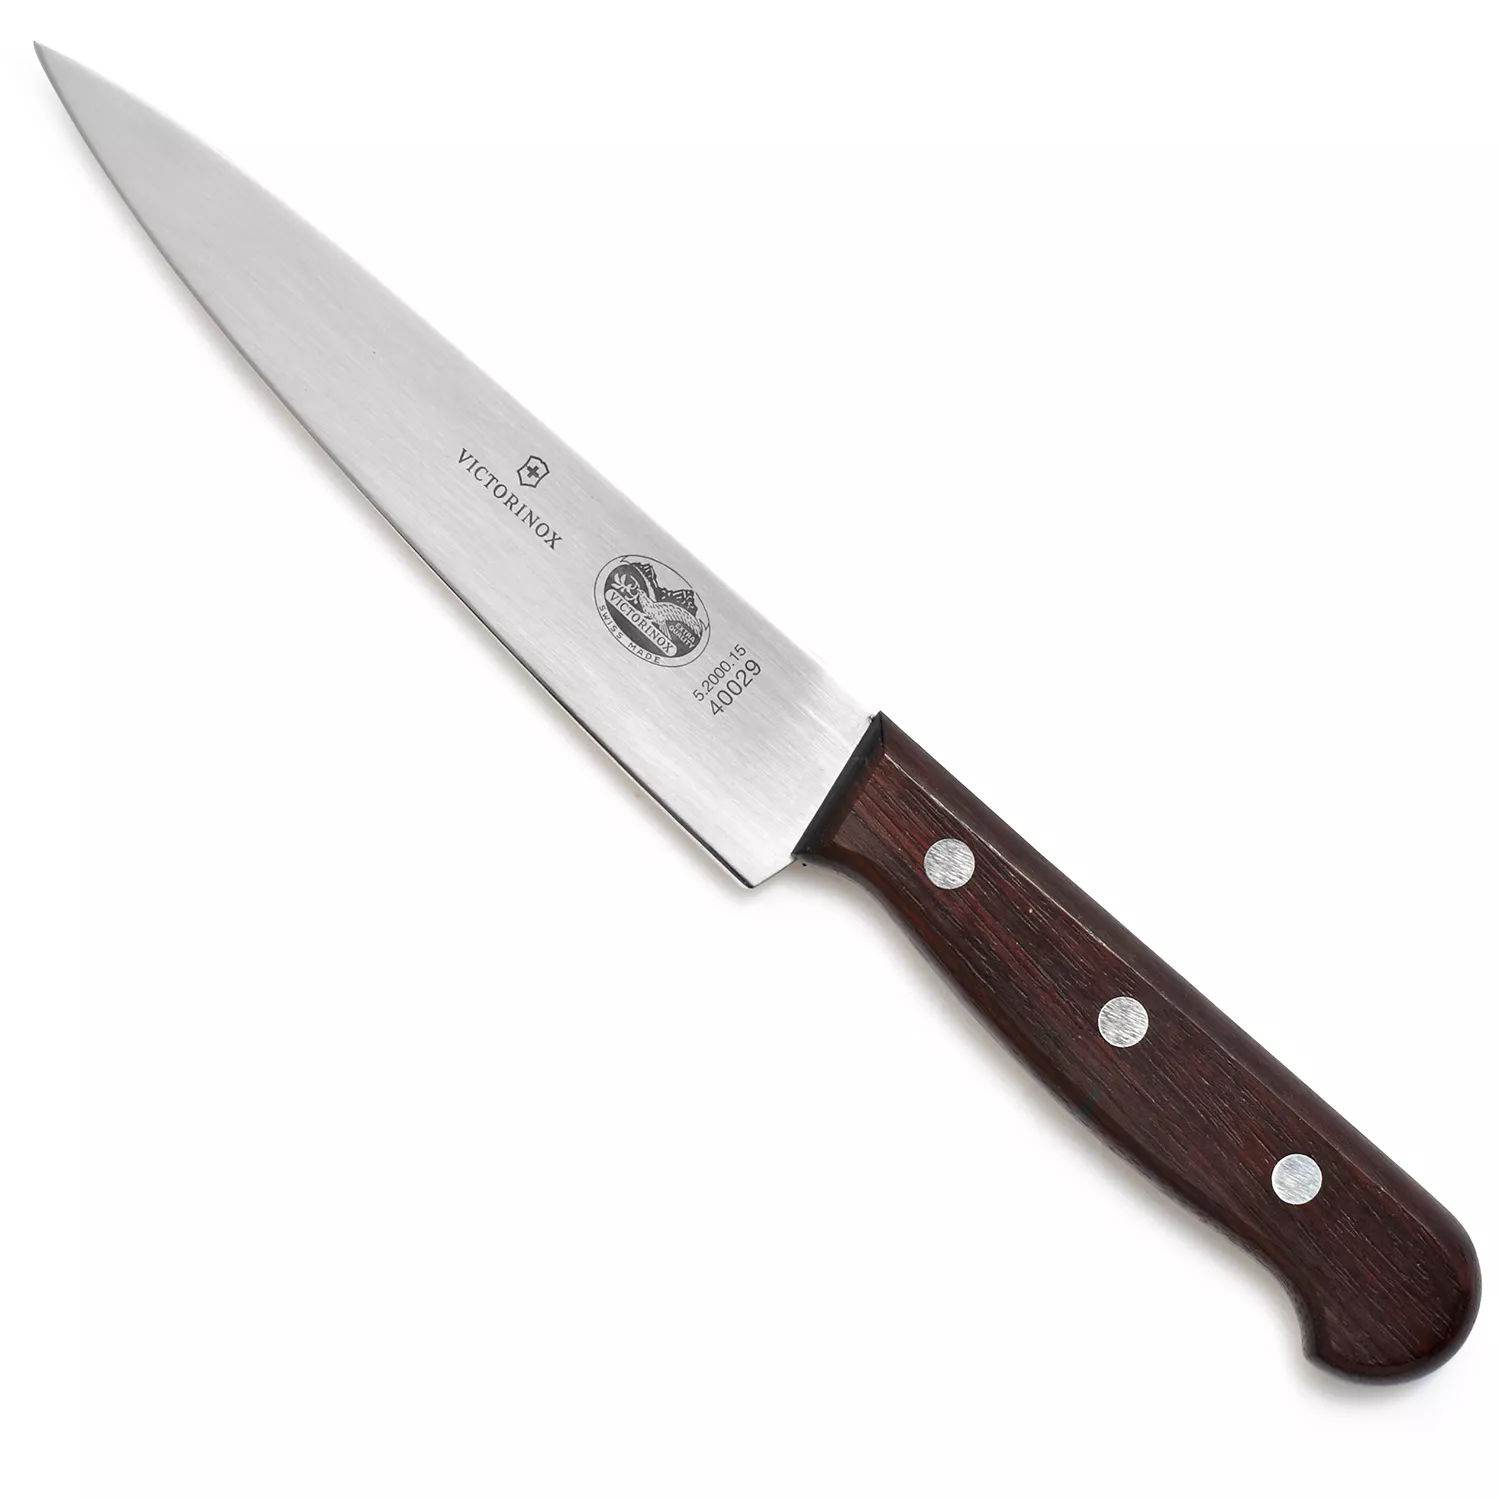 Victorinox (formerly Forschner) Rosewood 8 Chef's Knife at Swiss